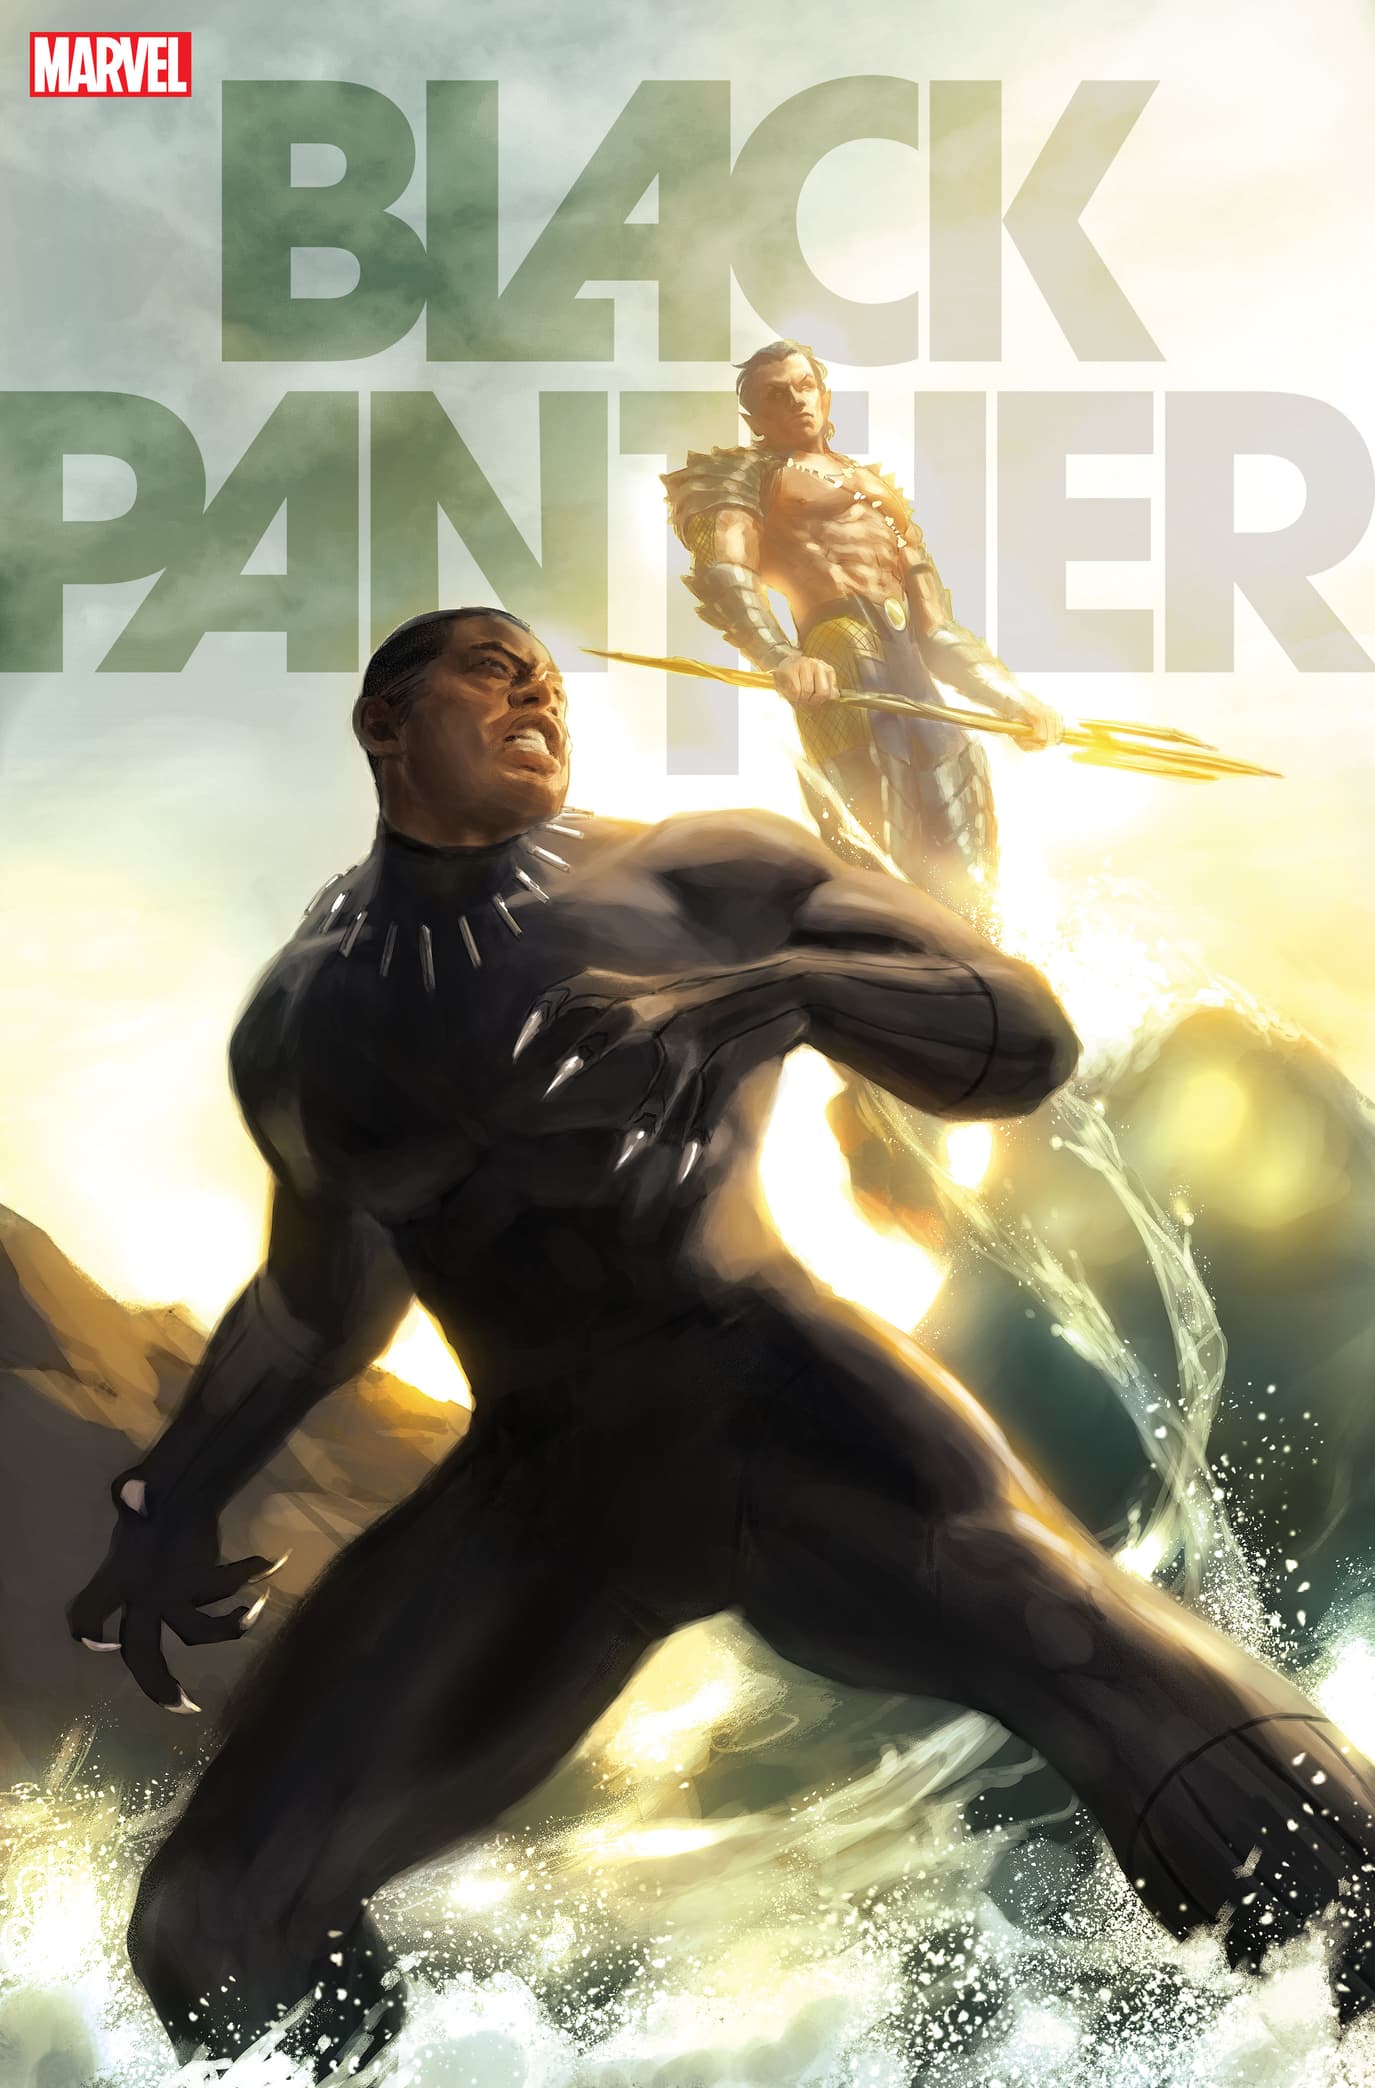 BLACK PANTHER #13 Variant Cover by Miguel Mercado